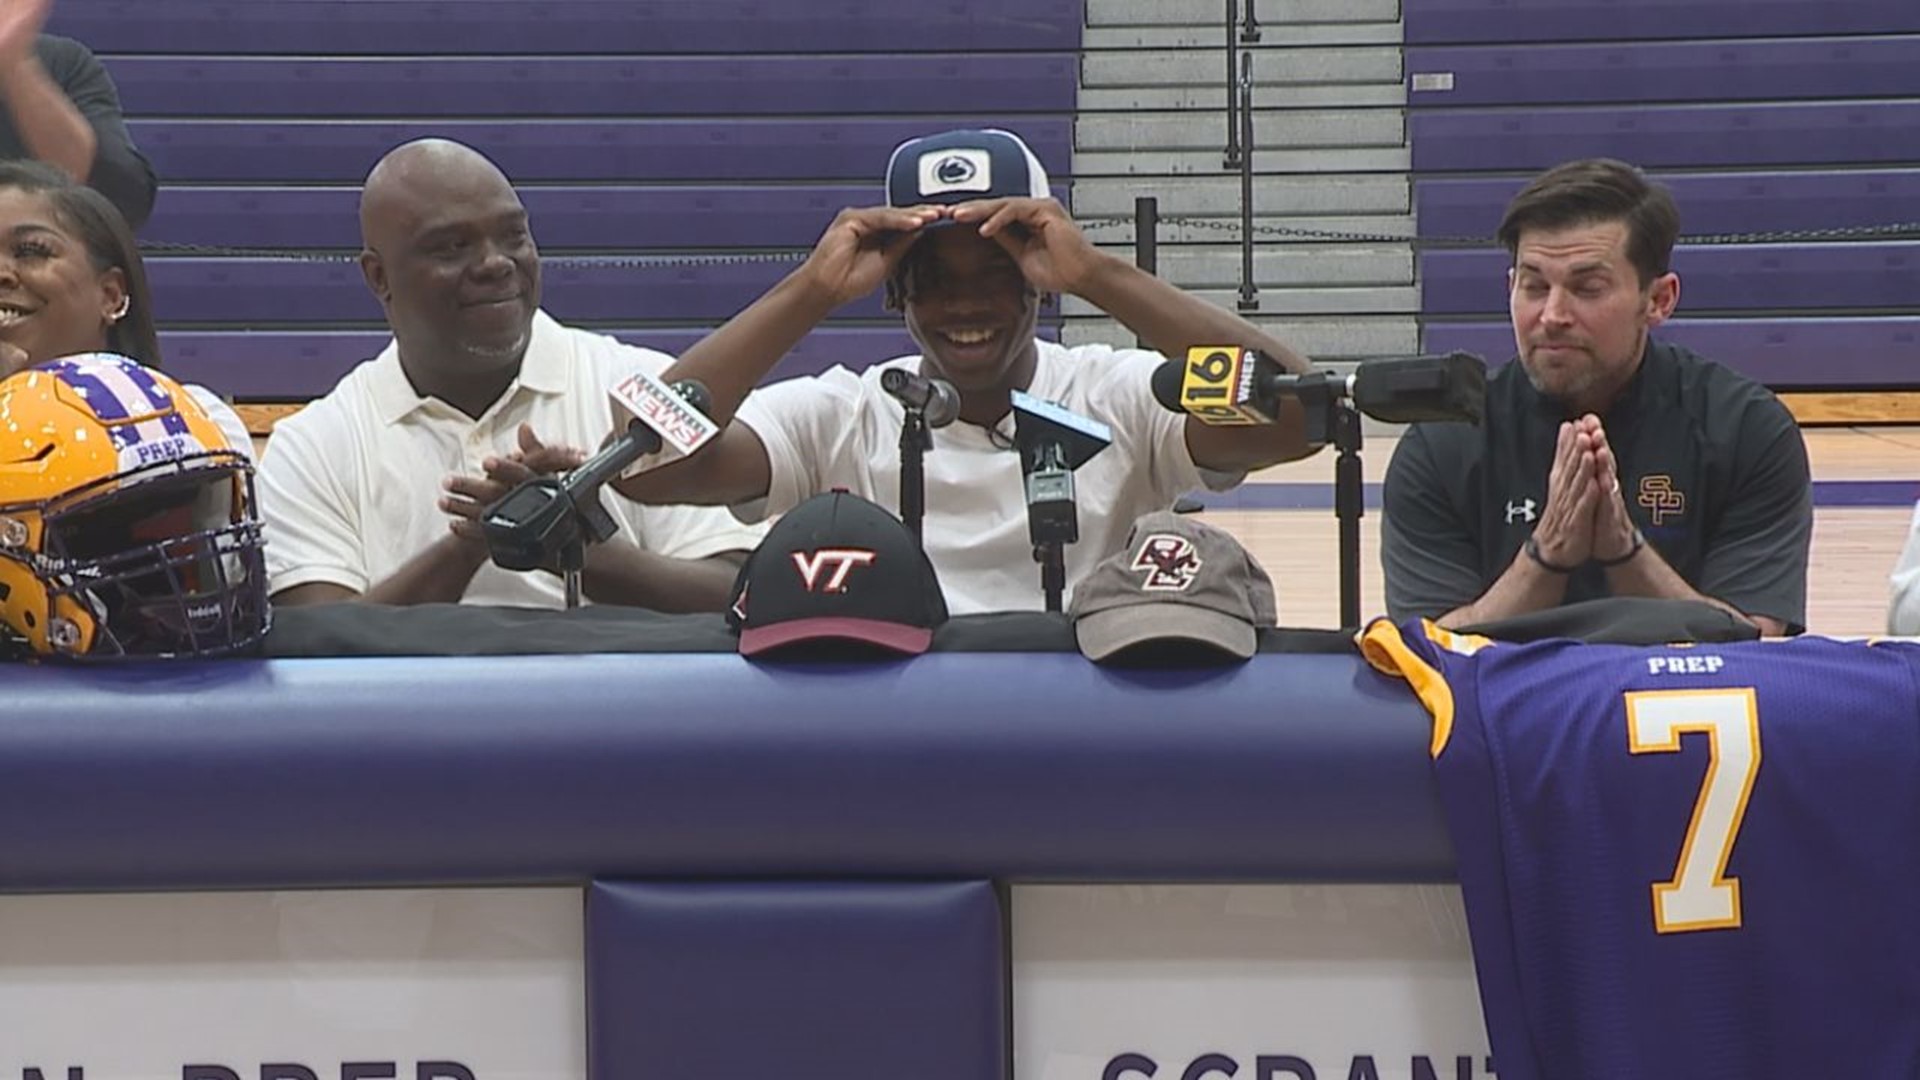 Montgomery Chose Penn State Over Virginia Tech and Boston College in a Ceremony at Scranton Prep on Monday